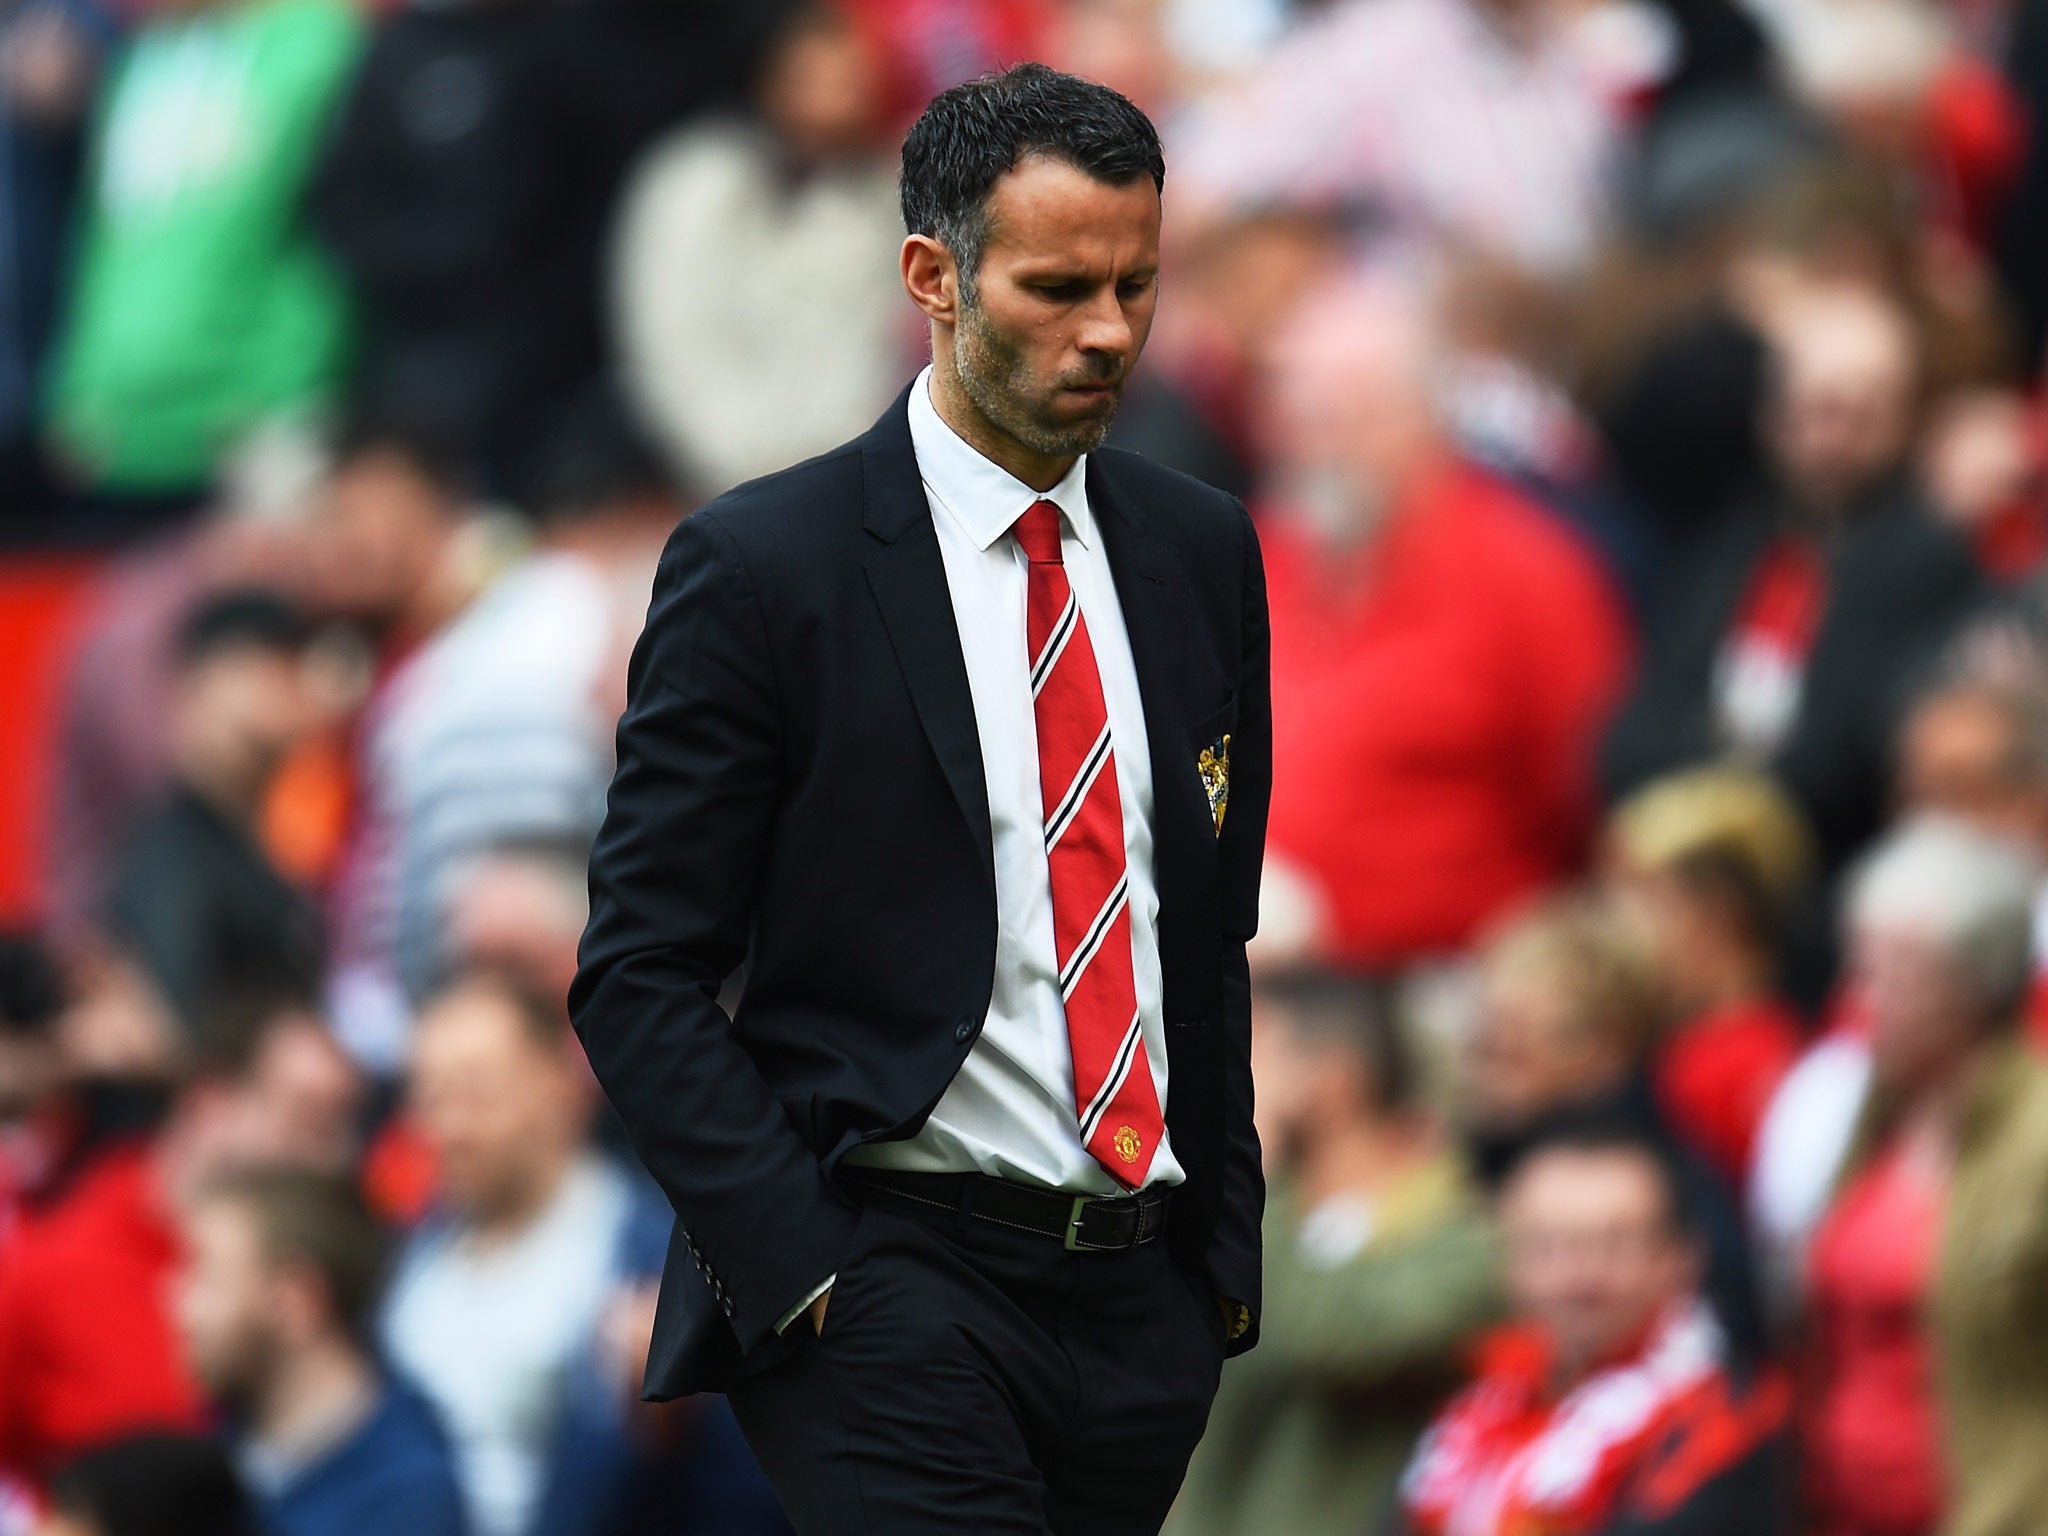 Ryan Giggs pictured after Manchester United's 1-0 defeat to Sunderland at Old Trafford